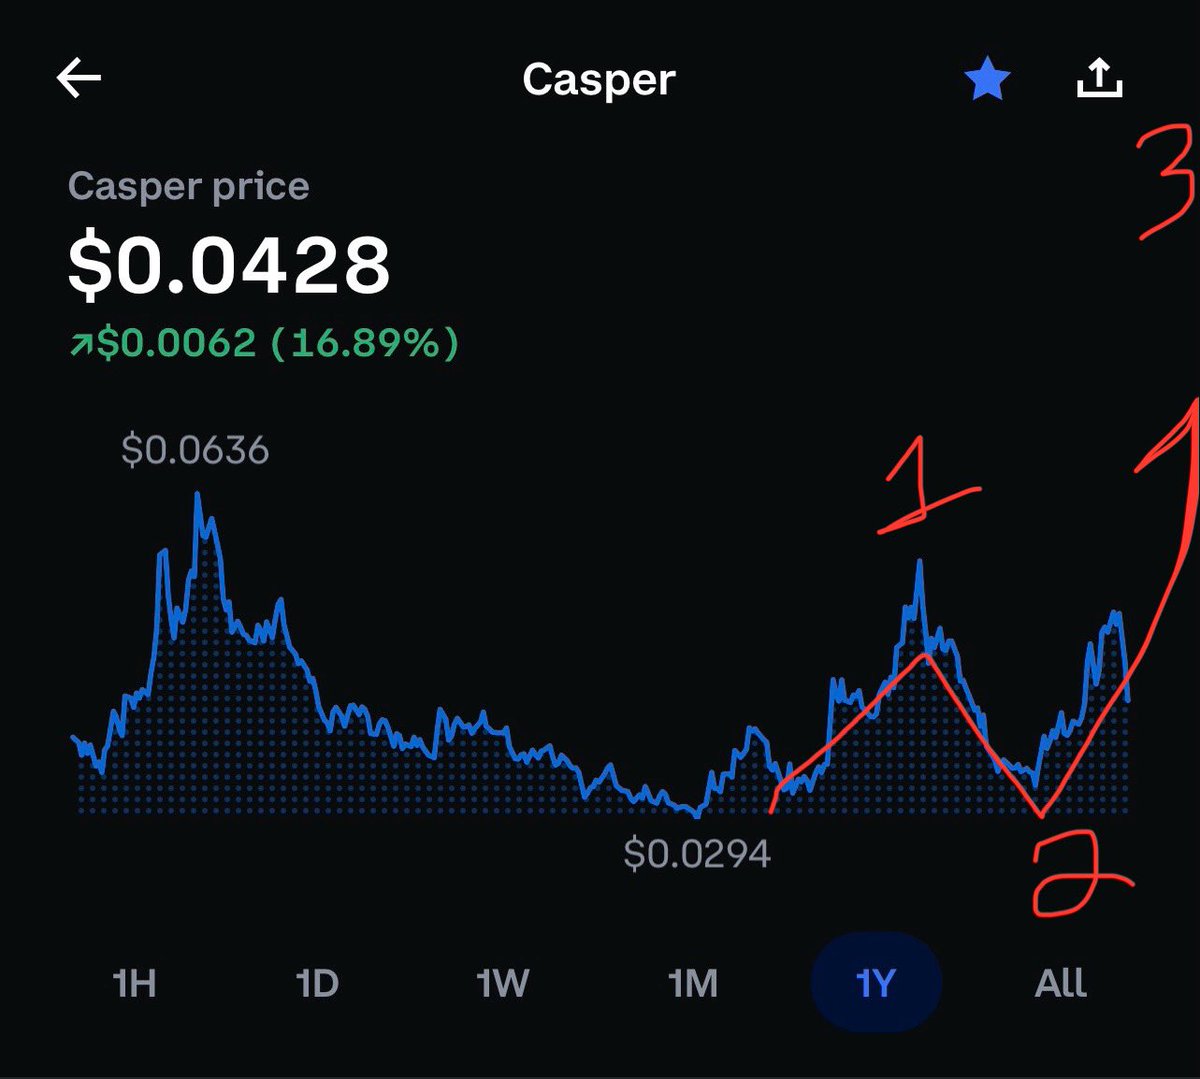 Man #CSPR is setting itself up for a fun rest of the year especially with the #IBM news and upgrades coming soon!! This is going to be so much fun!

#CasperLabs #Casper #Crypto #AI #XRPCommunity #CasperCommunity